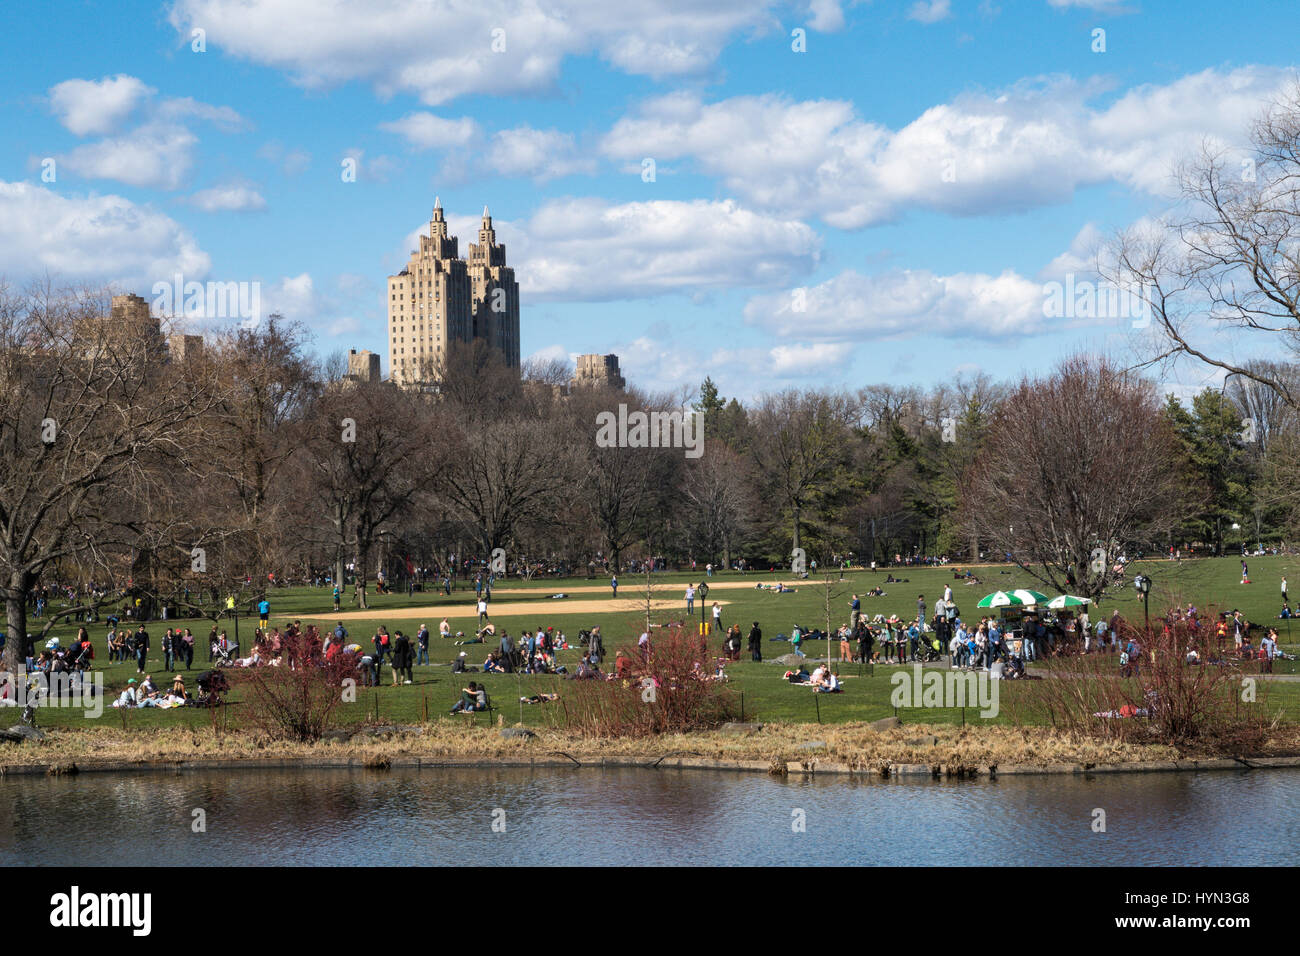 View of the Upper West Side of Manhattan and Great Lawn of Central Park from Belvedere Castle, New York City, USA  2017 Stock Photo